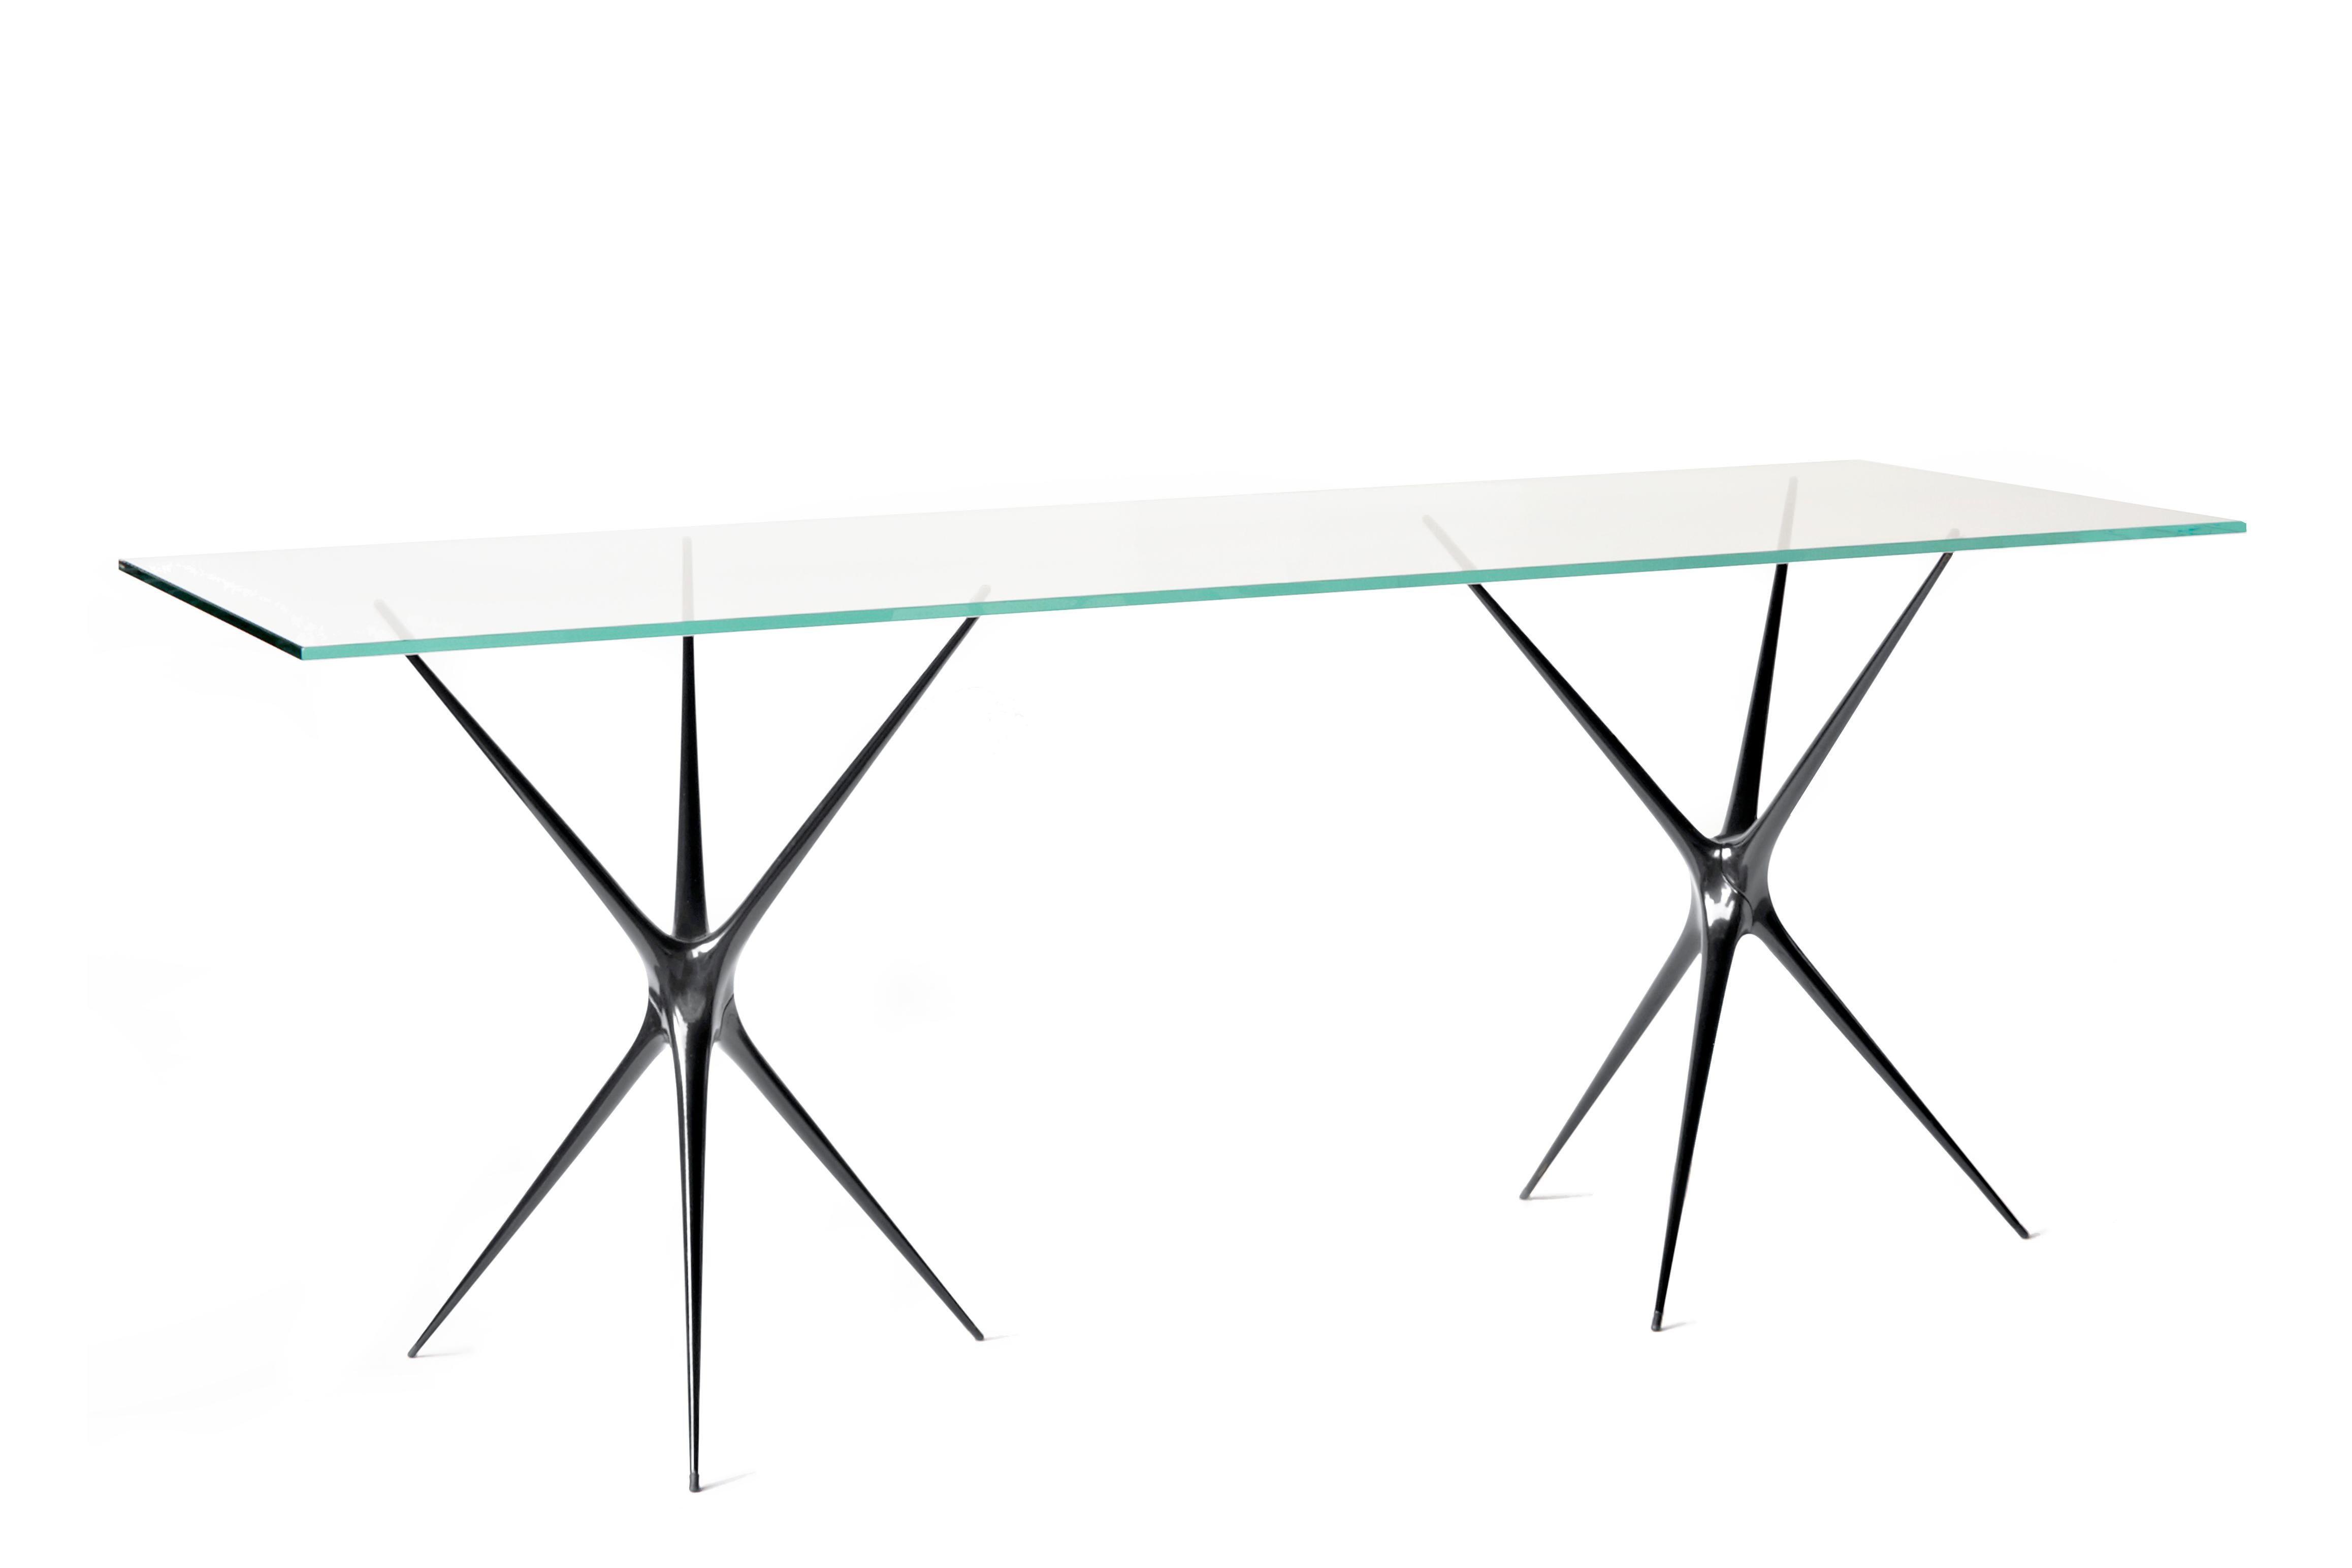 Supernova, Recycled Cast Aluminum Trestle Table Legs & Glass by Made in Ratio For Sale 4